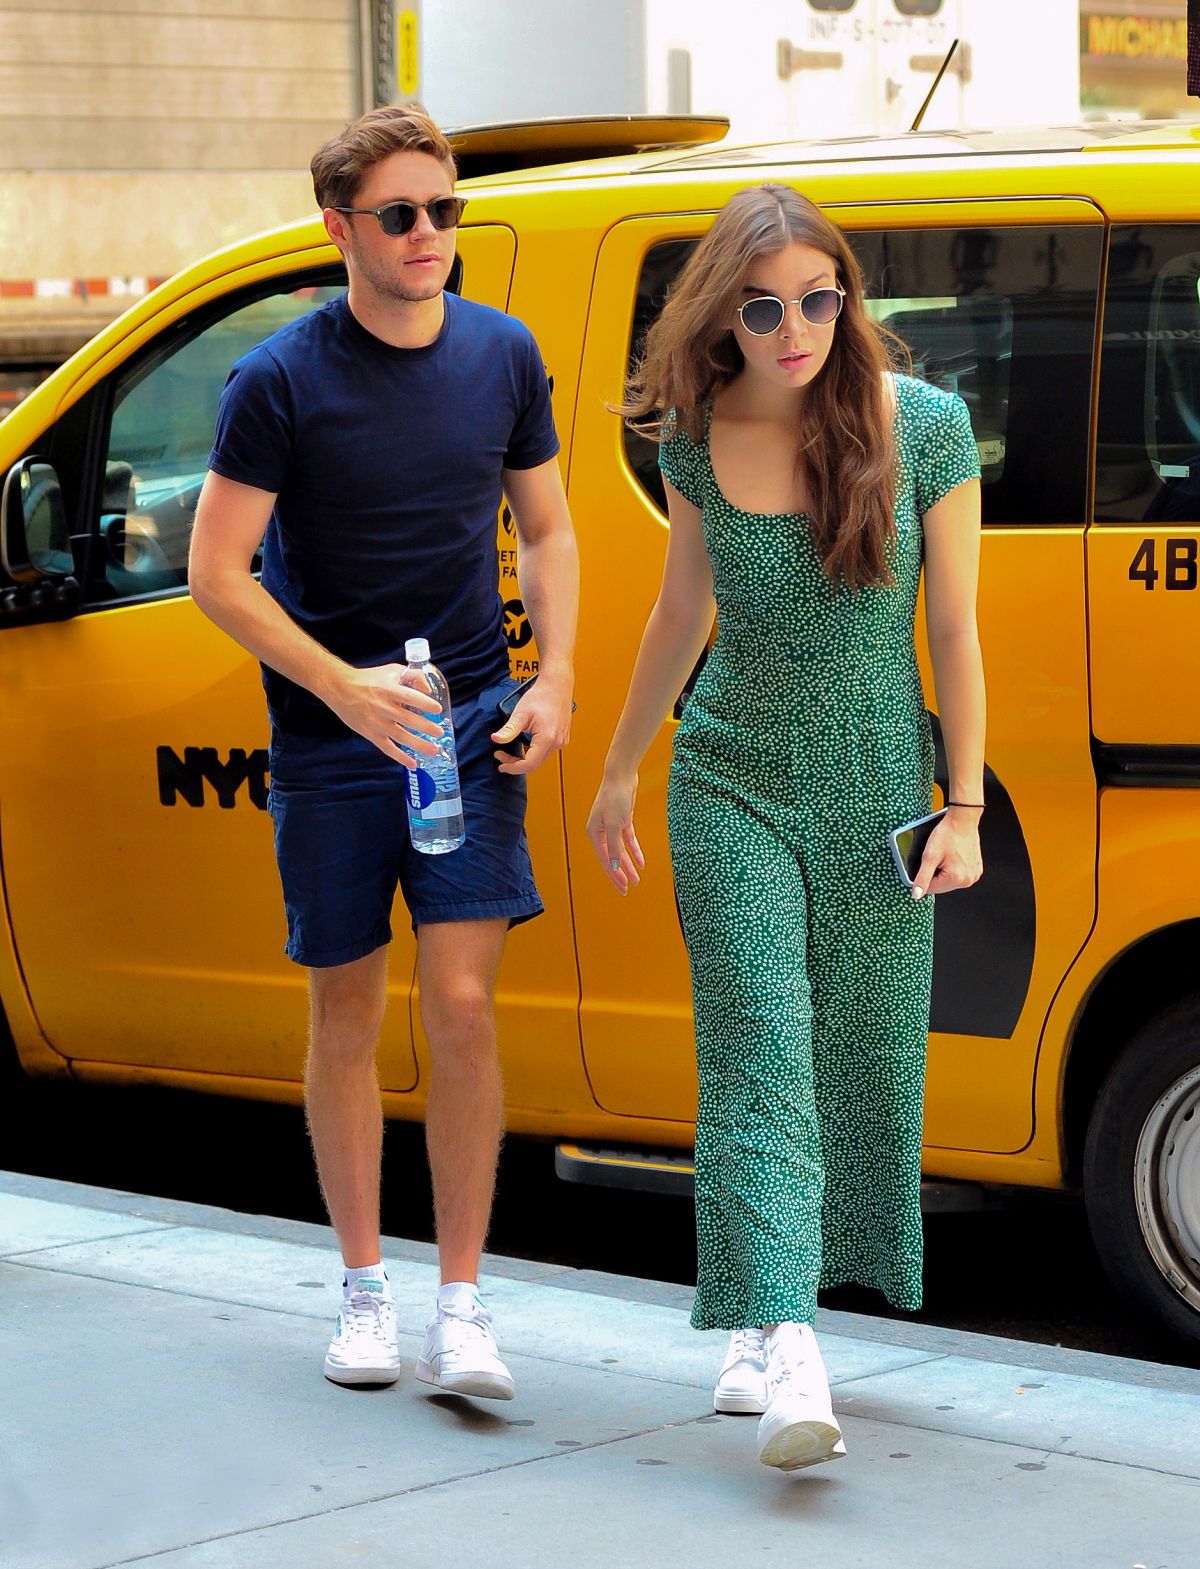 HAILEE STEINFELD and Niall Horan Shopping at Saks Fifth Avenue in New York 07/16/018 ...1200 x 1569